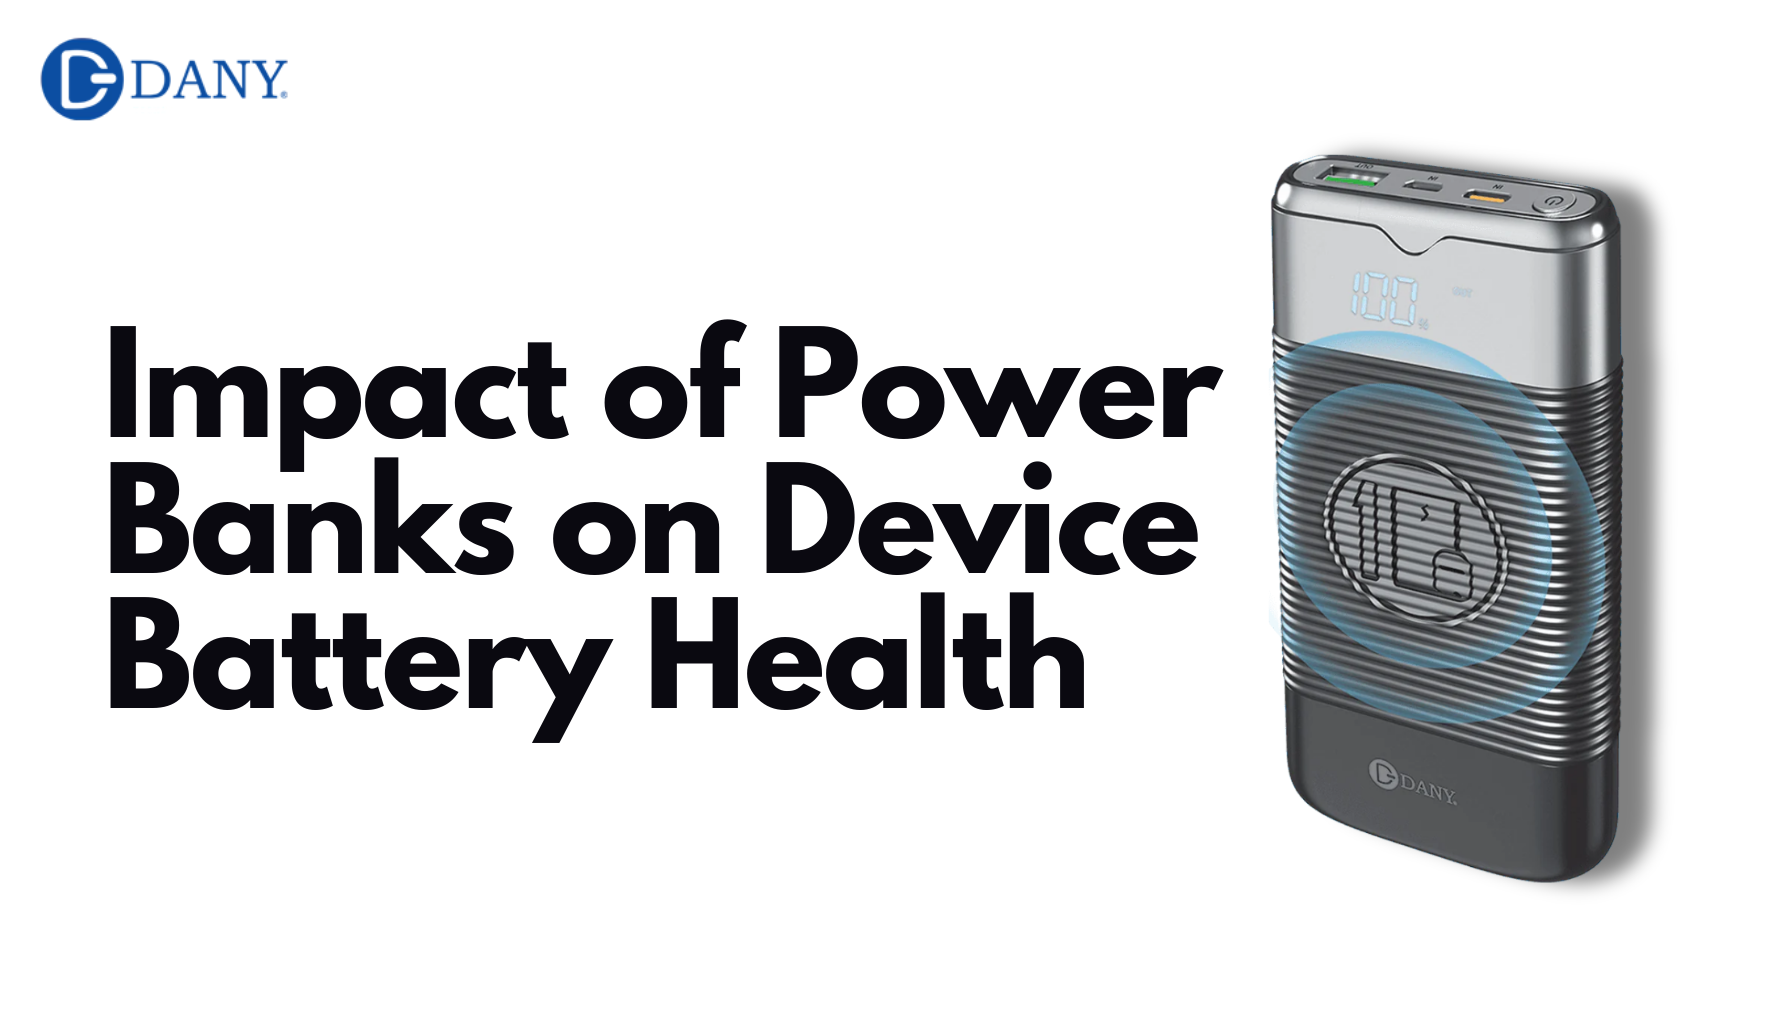 Impact of Power Banks on Device Battery Health